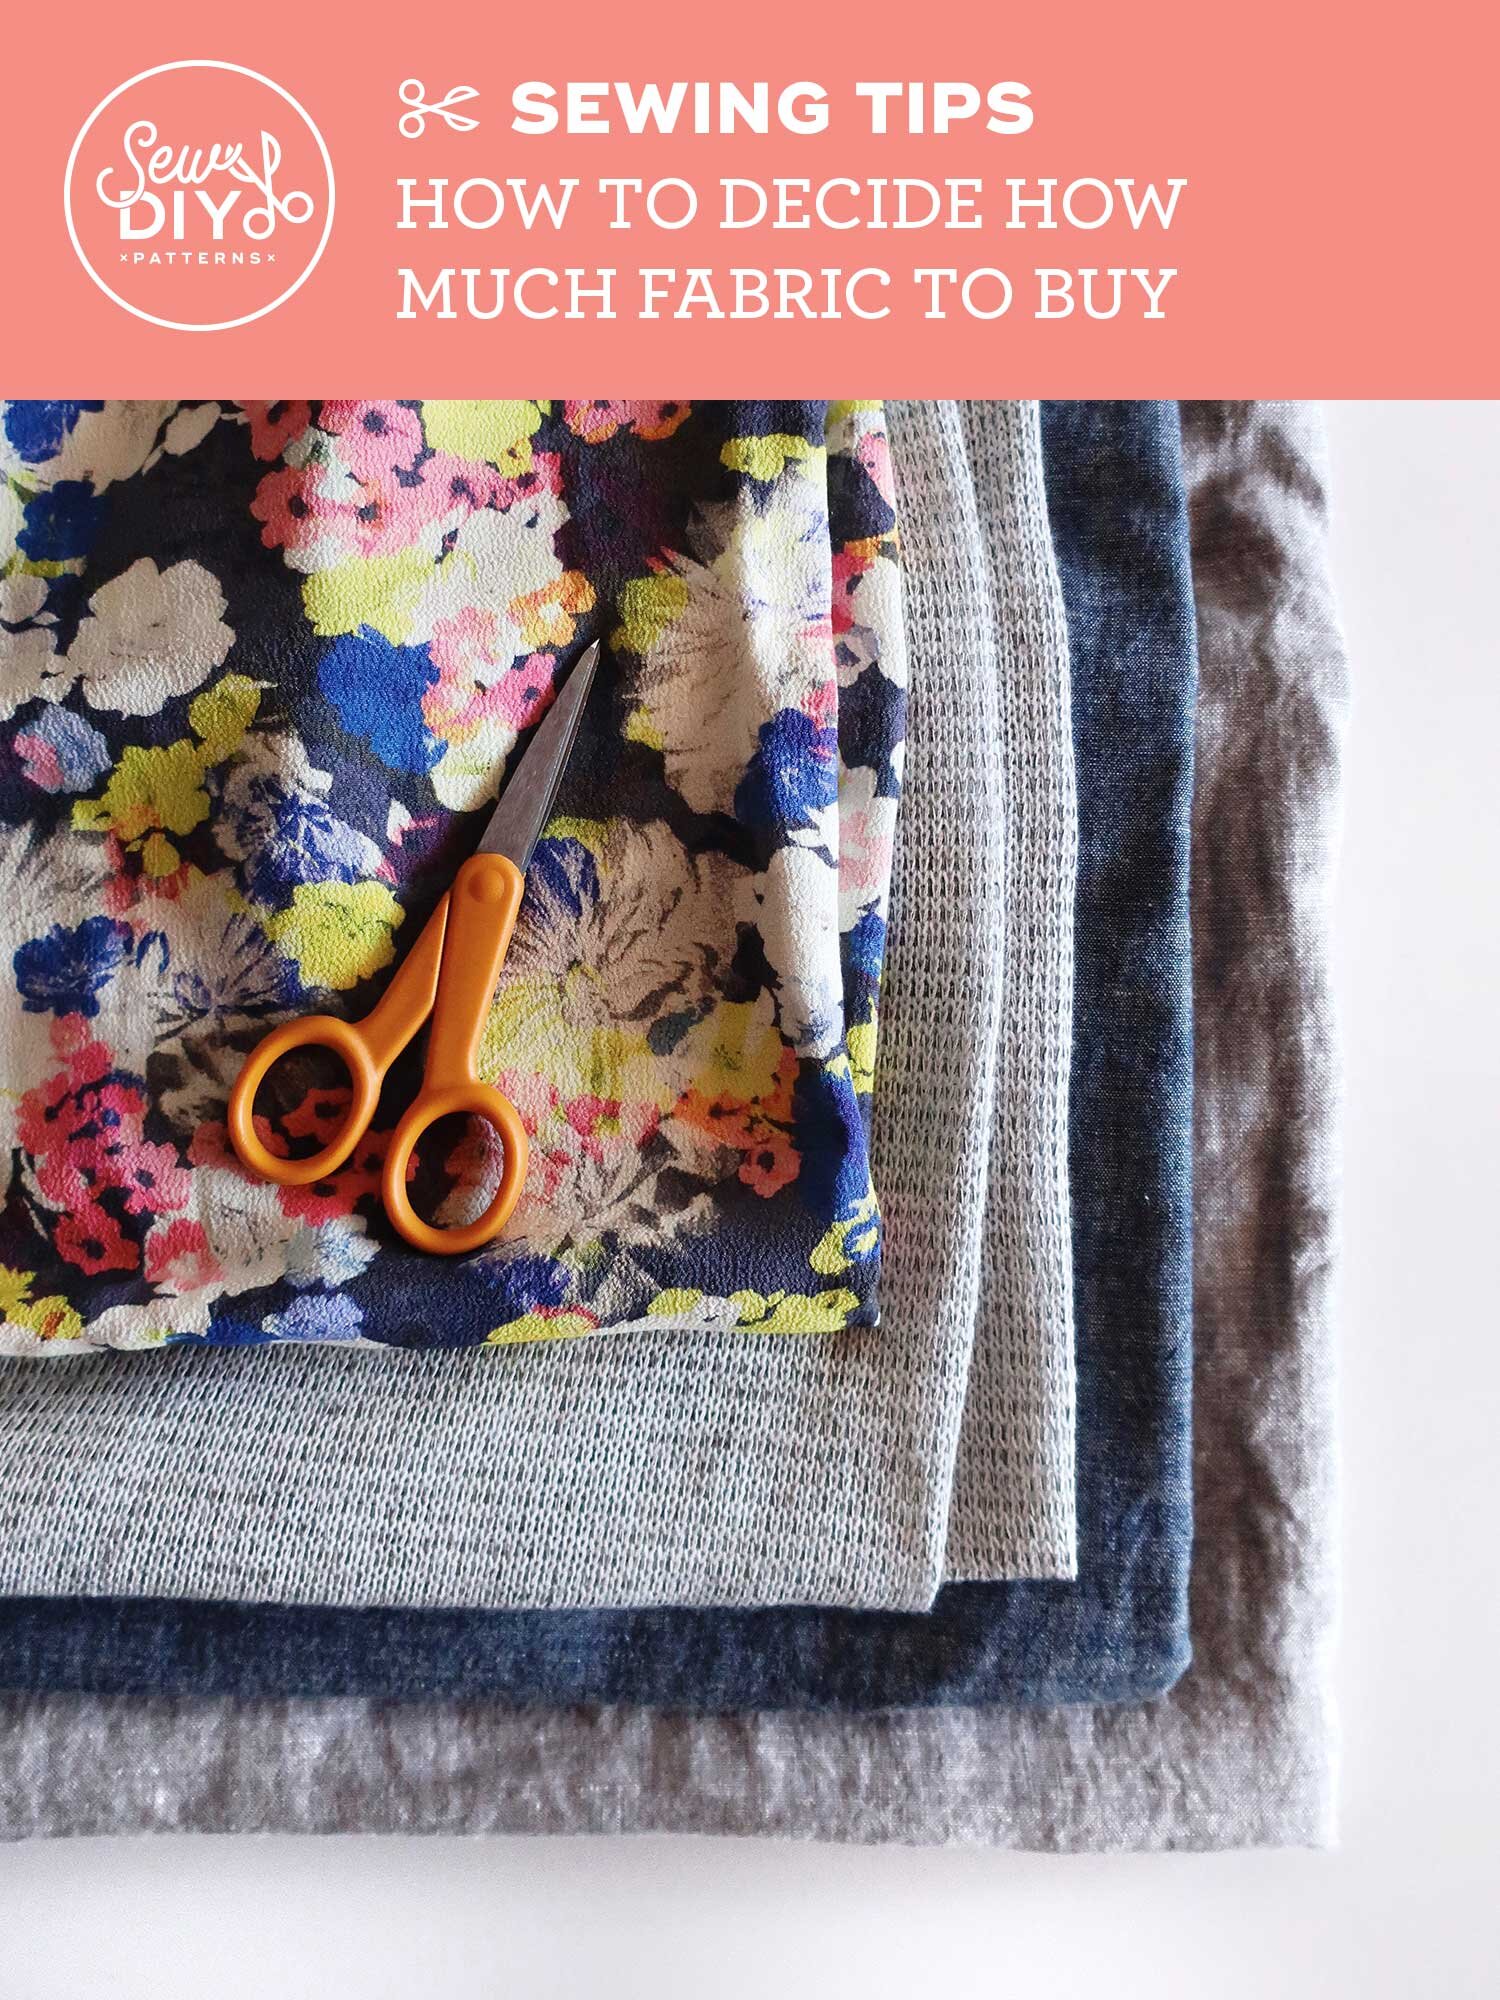 How to decide how much fabric to buy — Sew DIY